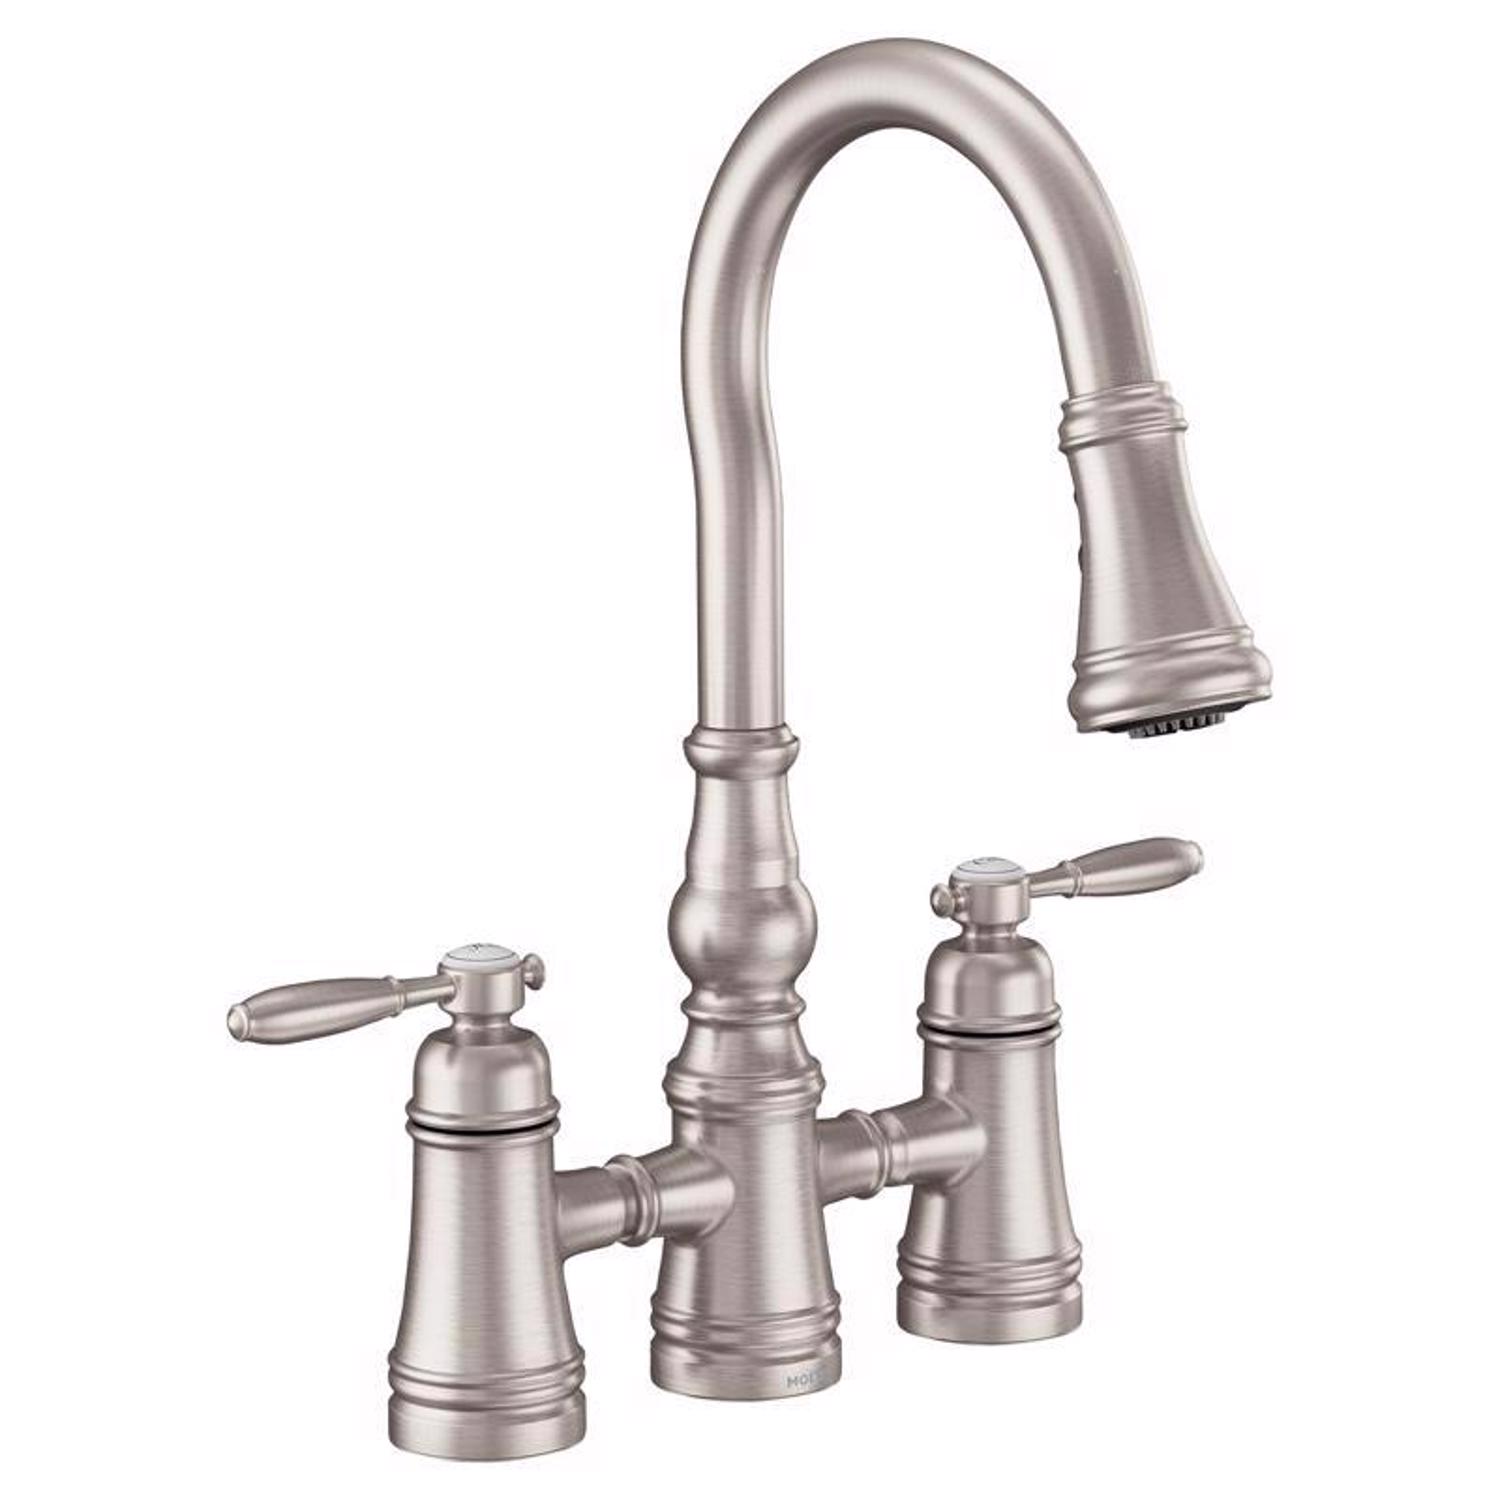 Photos - Tap Moen Weymouth Two Handle Stainless Steel Pull-Down Kitchen Faucet S73204SR 